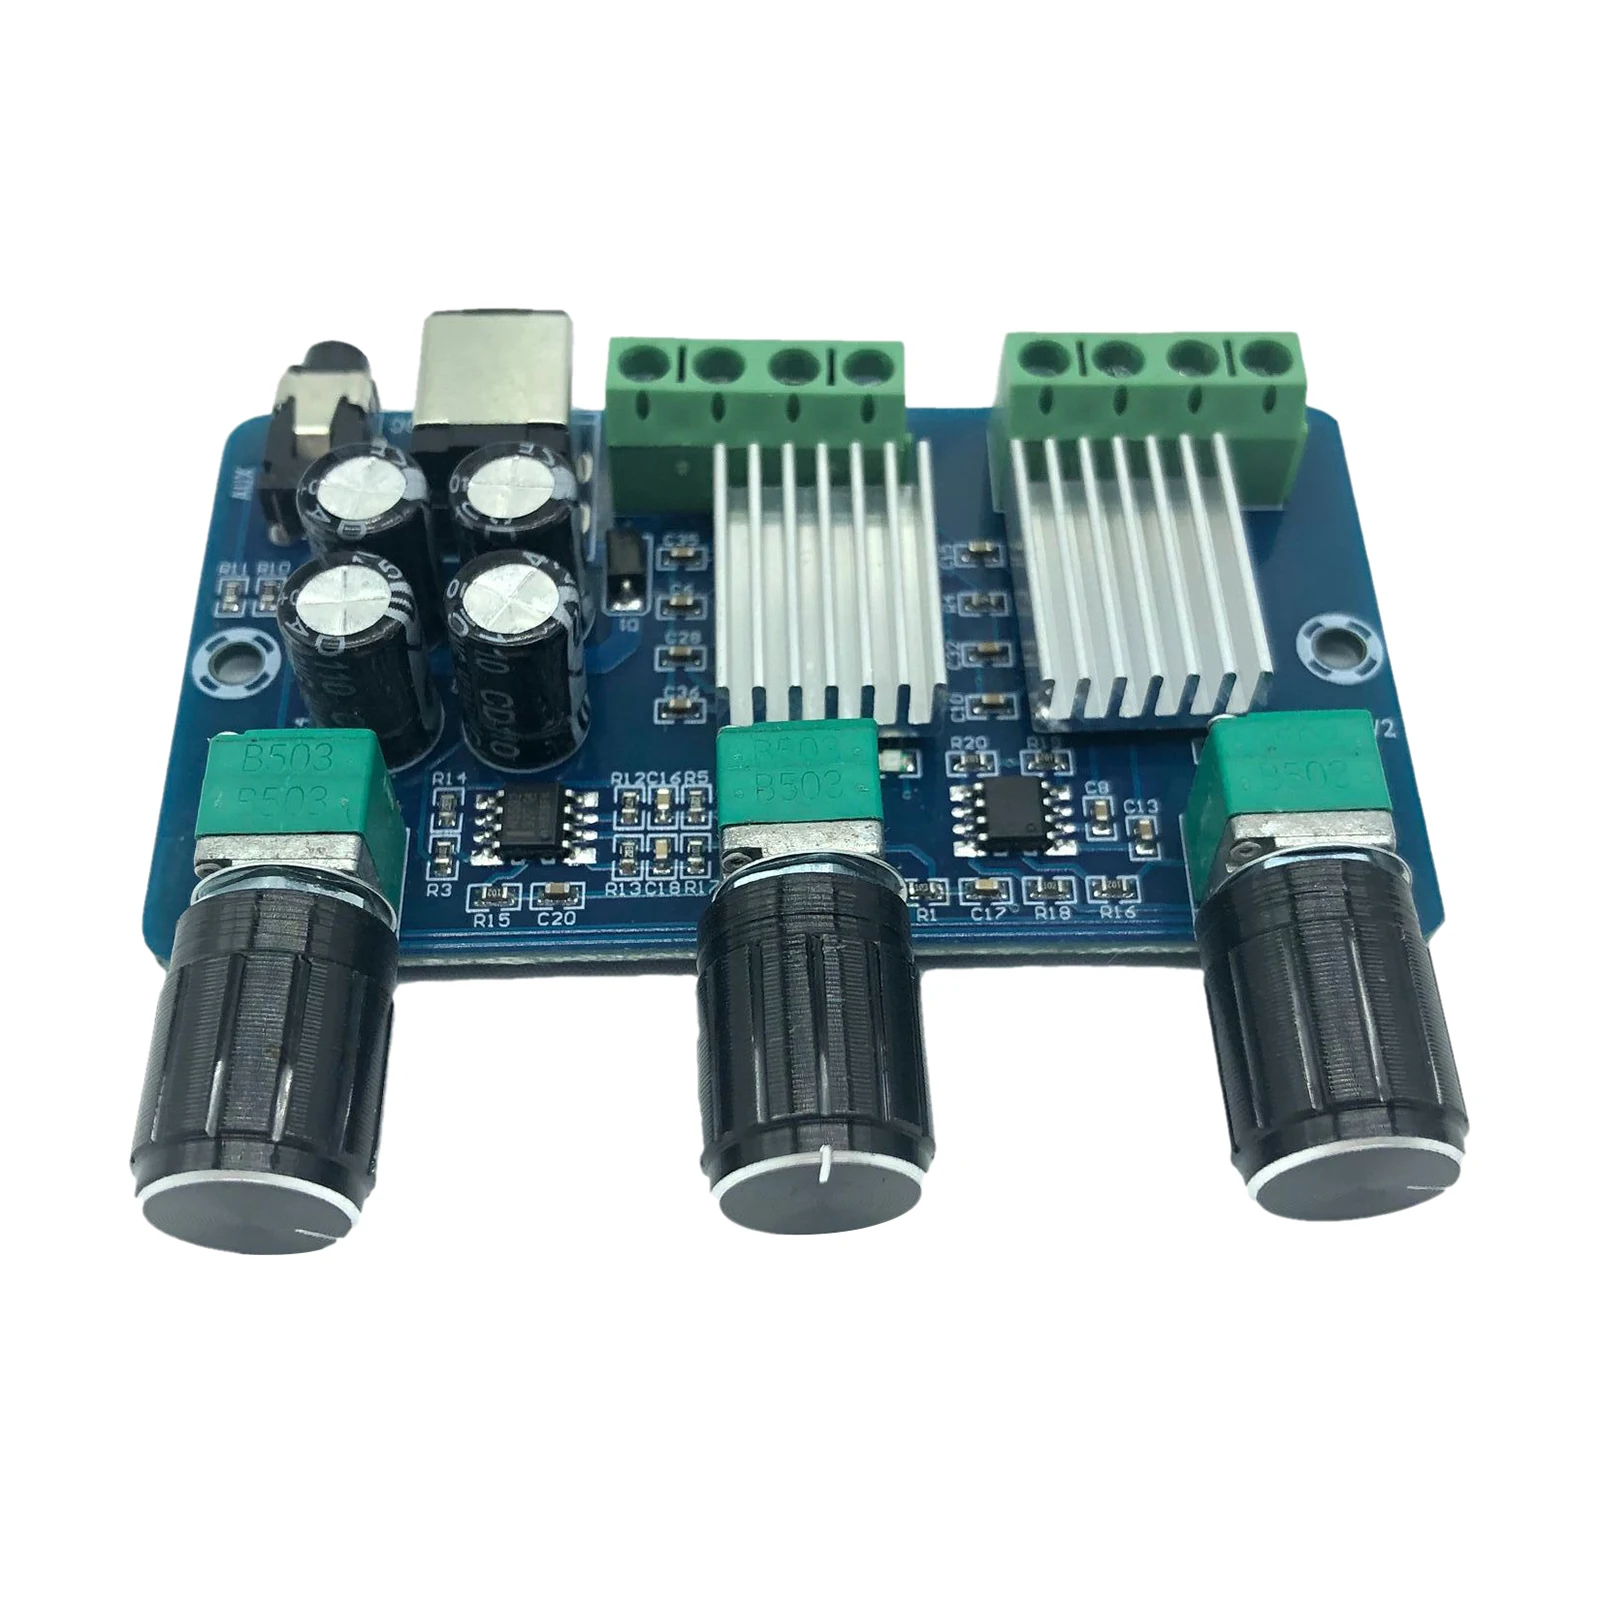 DC12V XH-A355 2.1 Channel Digital Stereo Audio Power Amplifier Board AMP